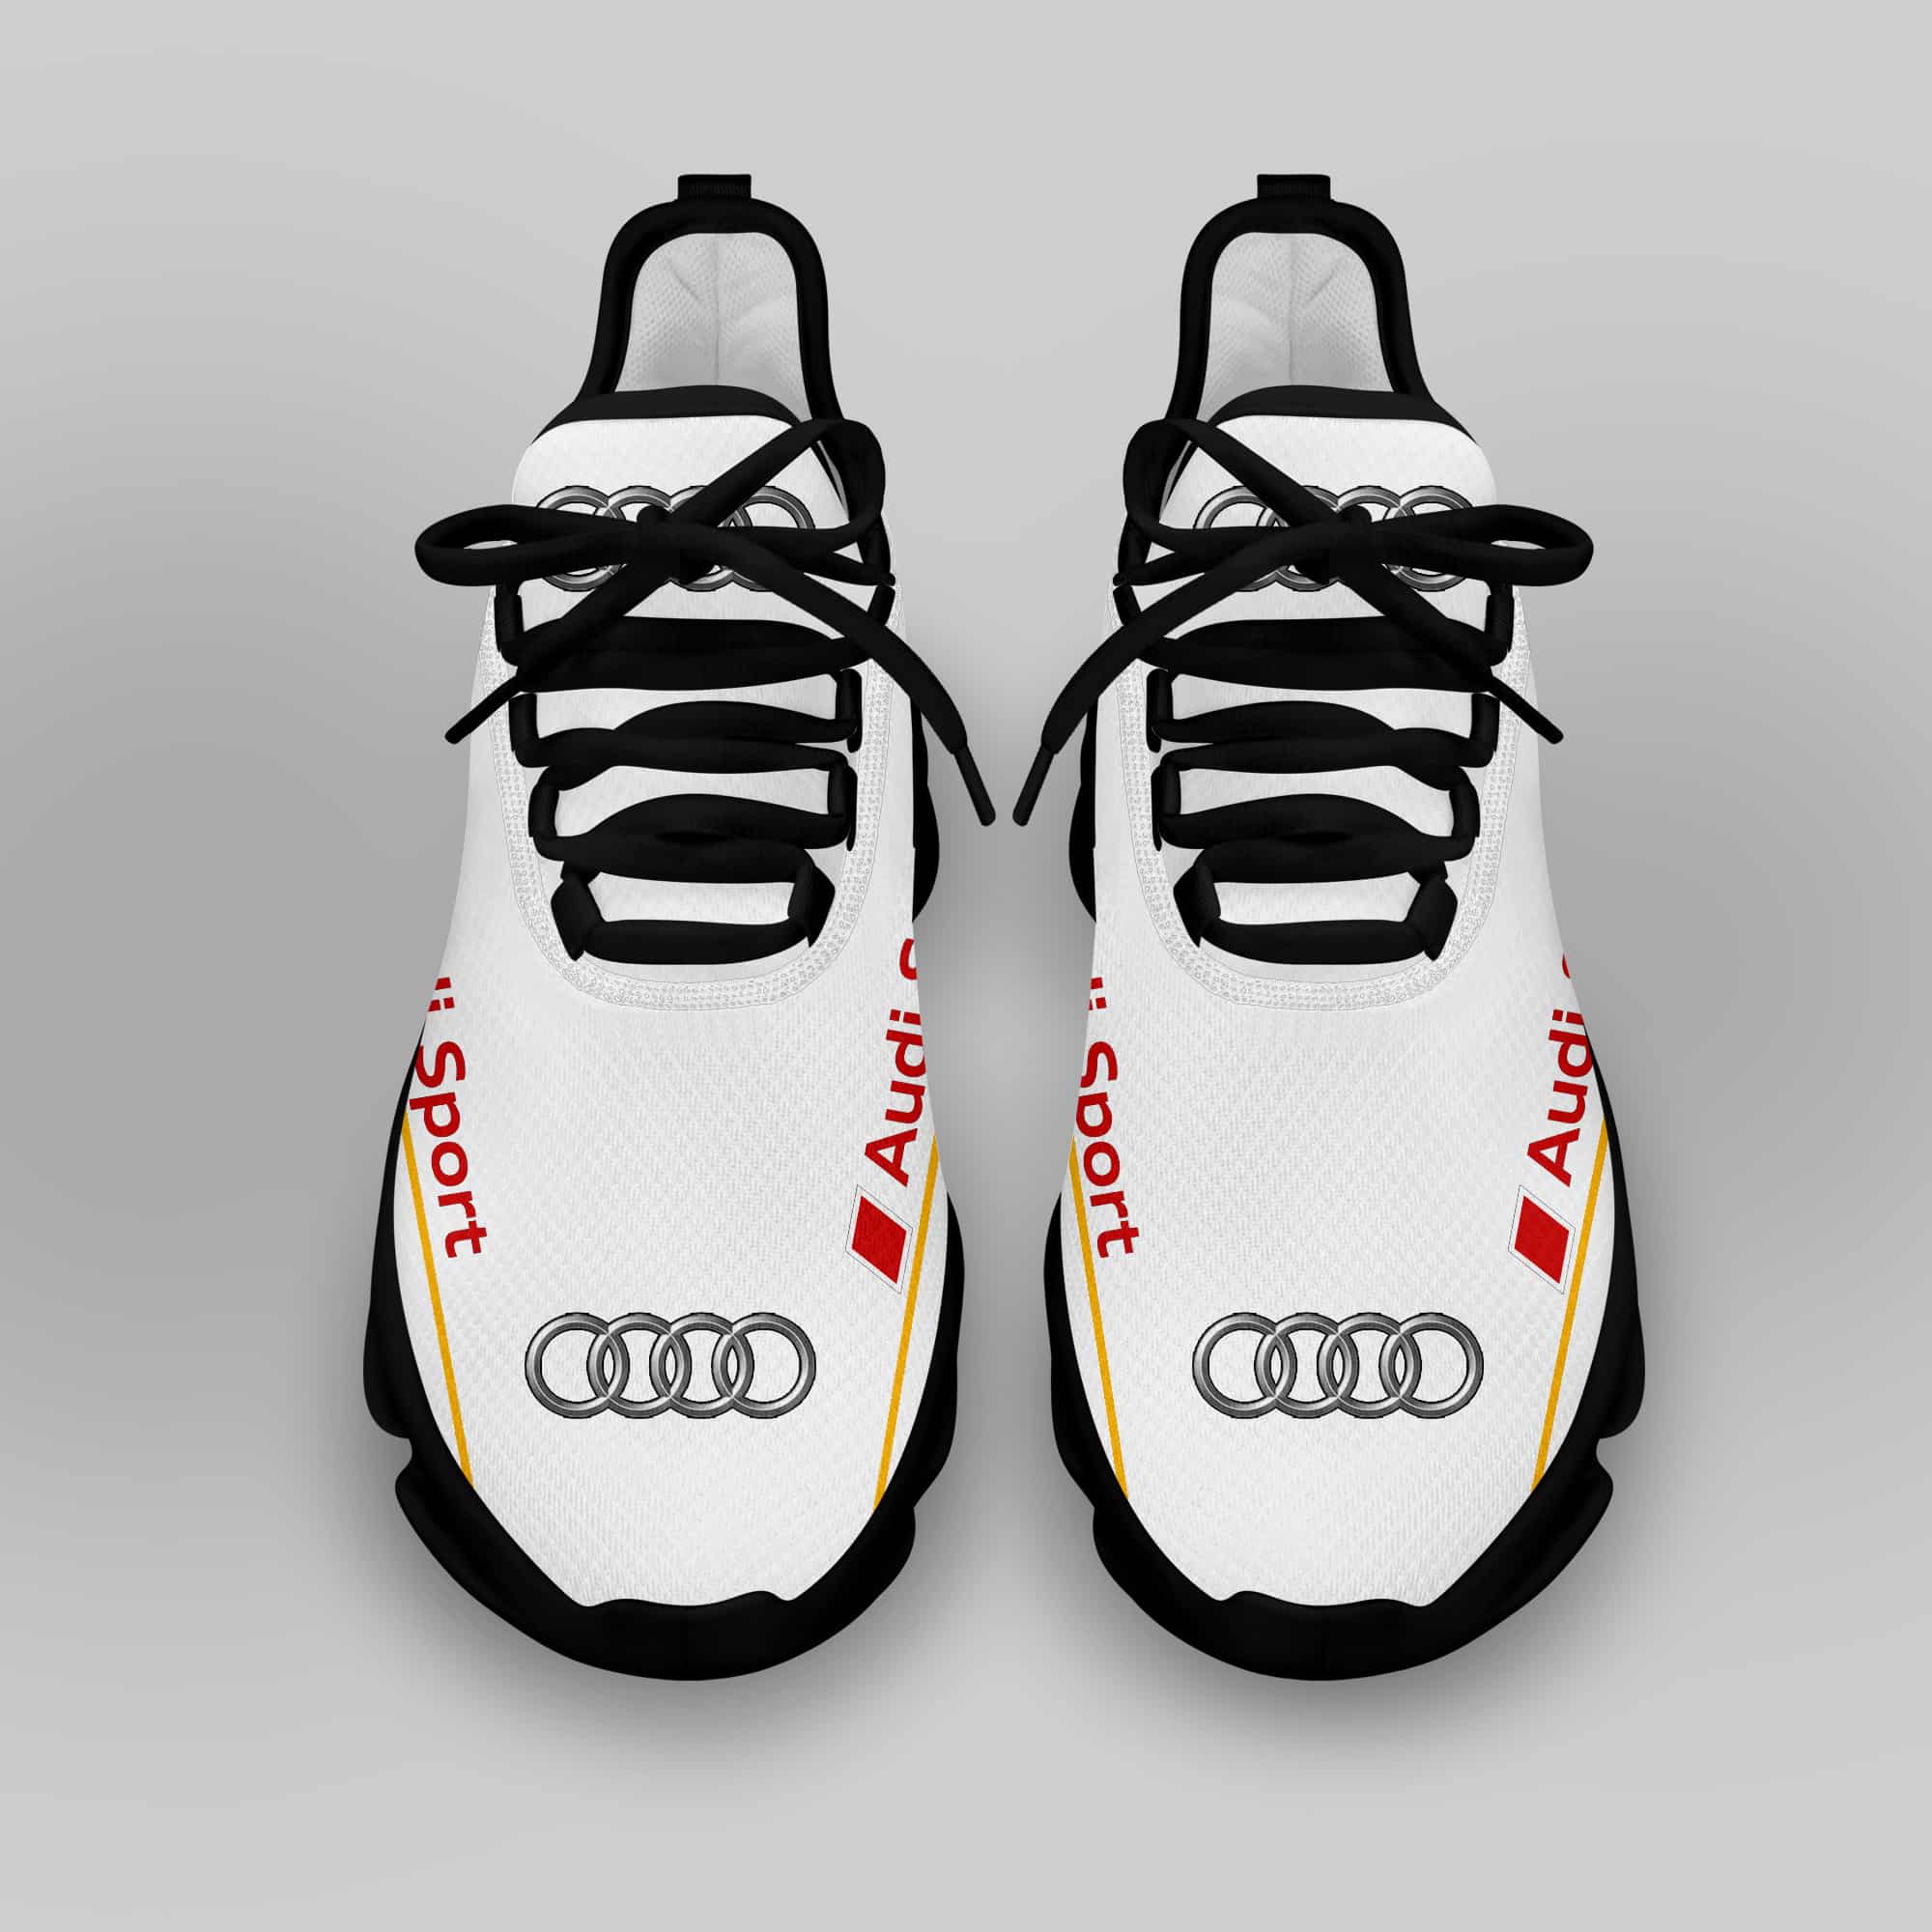 Audi Sport Running Shoes Max Soul Shoes Sneakers Ver 18 4